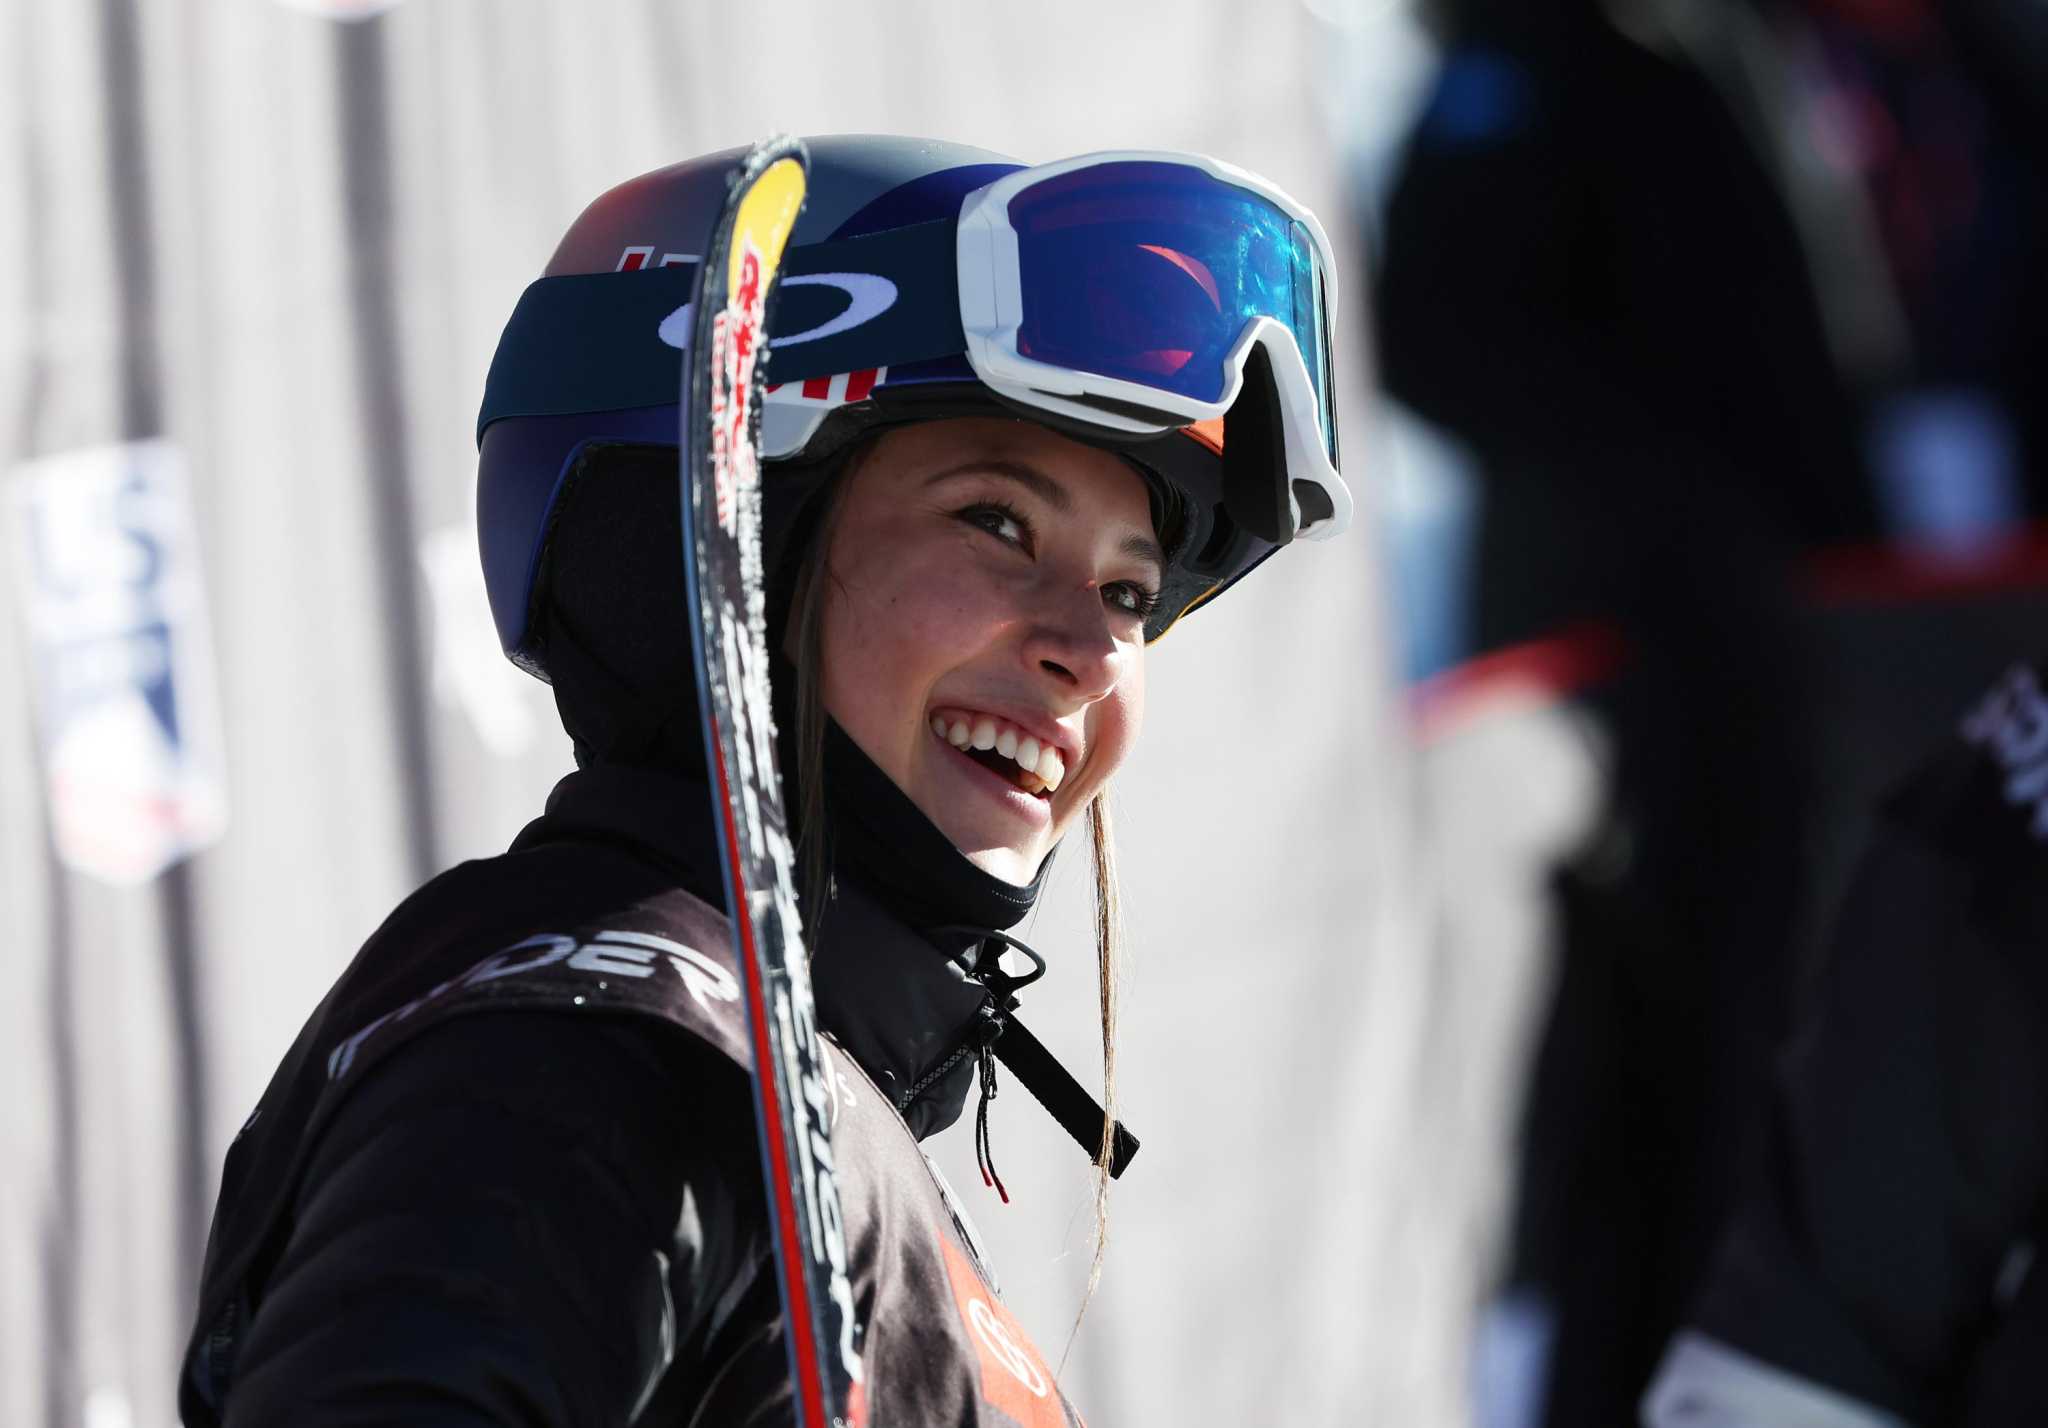 Beijing Olympics: Eileen Gu to ski for China after Bay Area upbringing